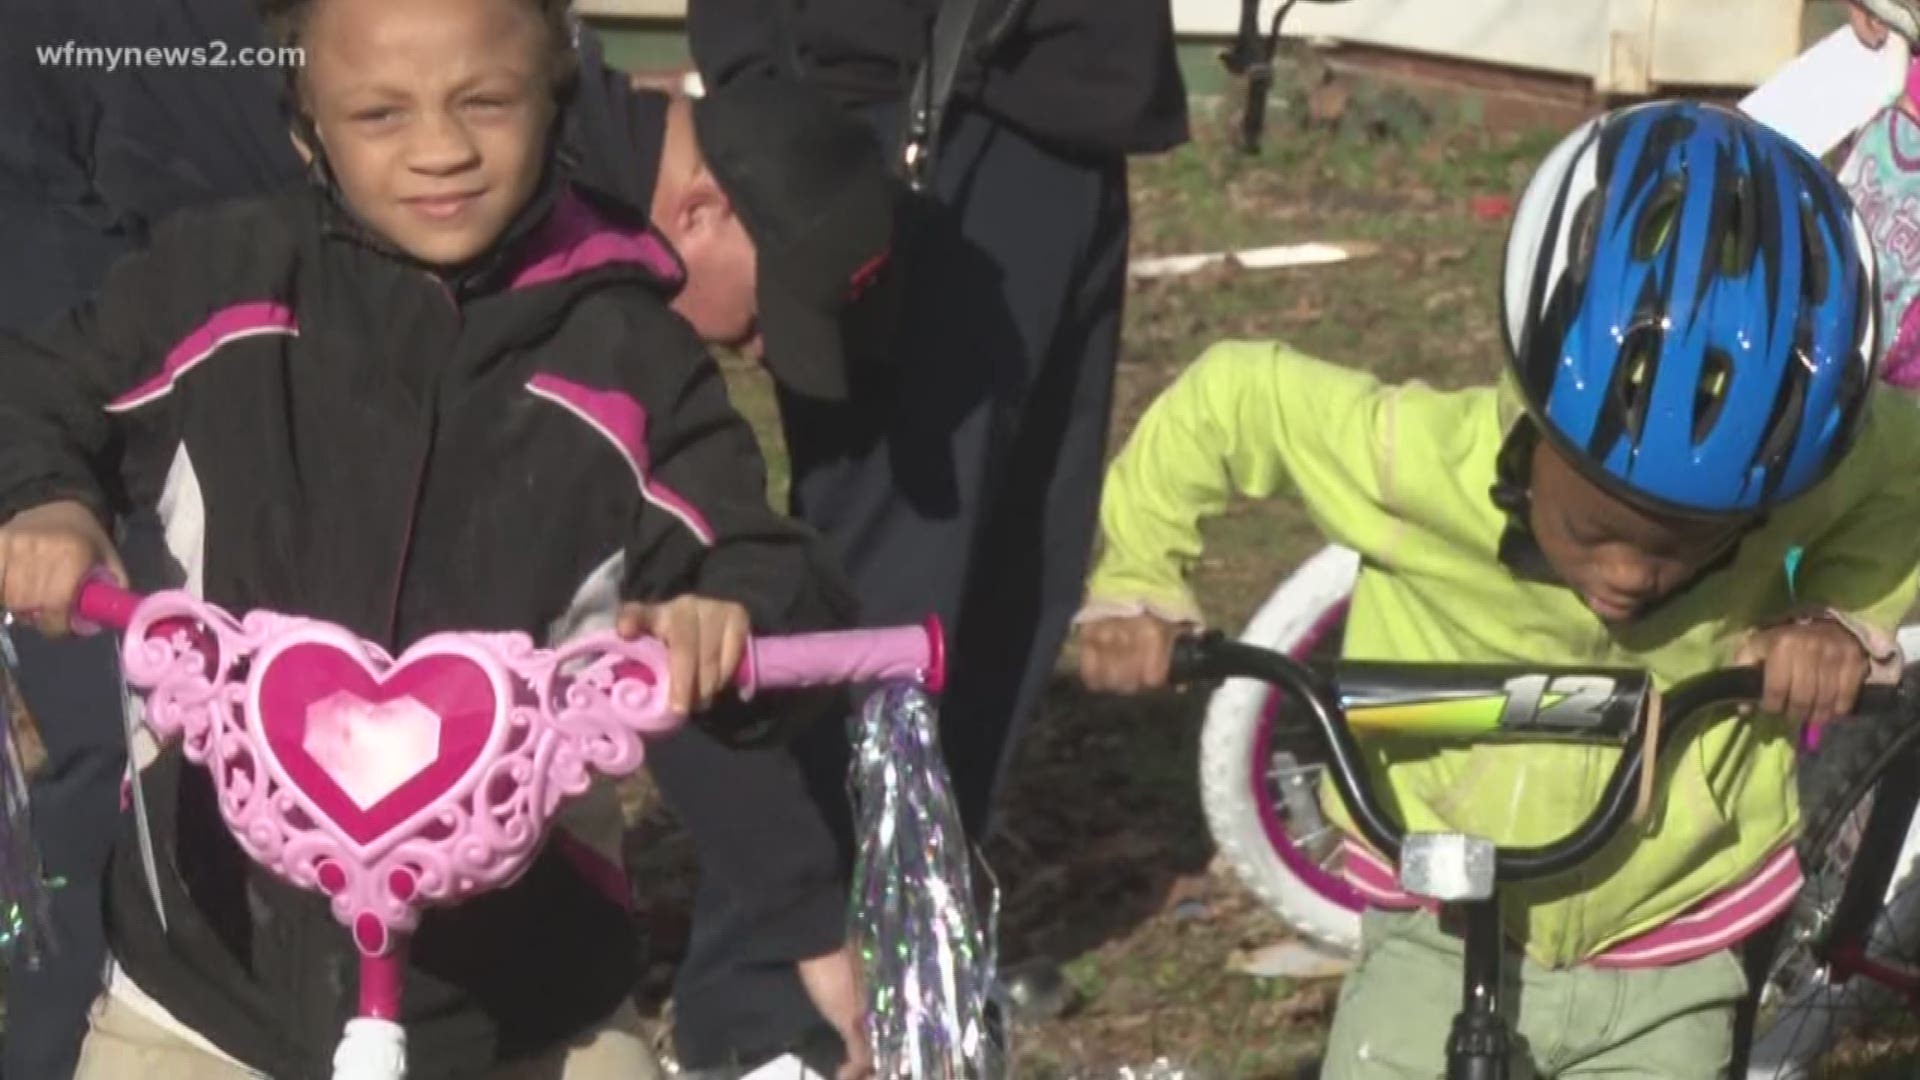 The WSFD surprised a family with 9 kids with brand new bikes ahead of Christmas.